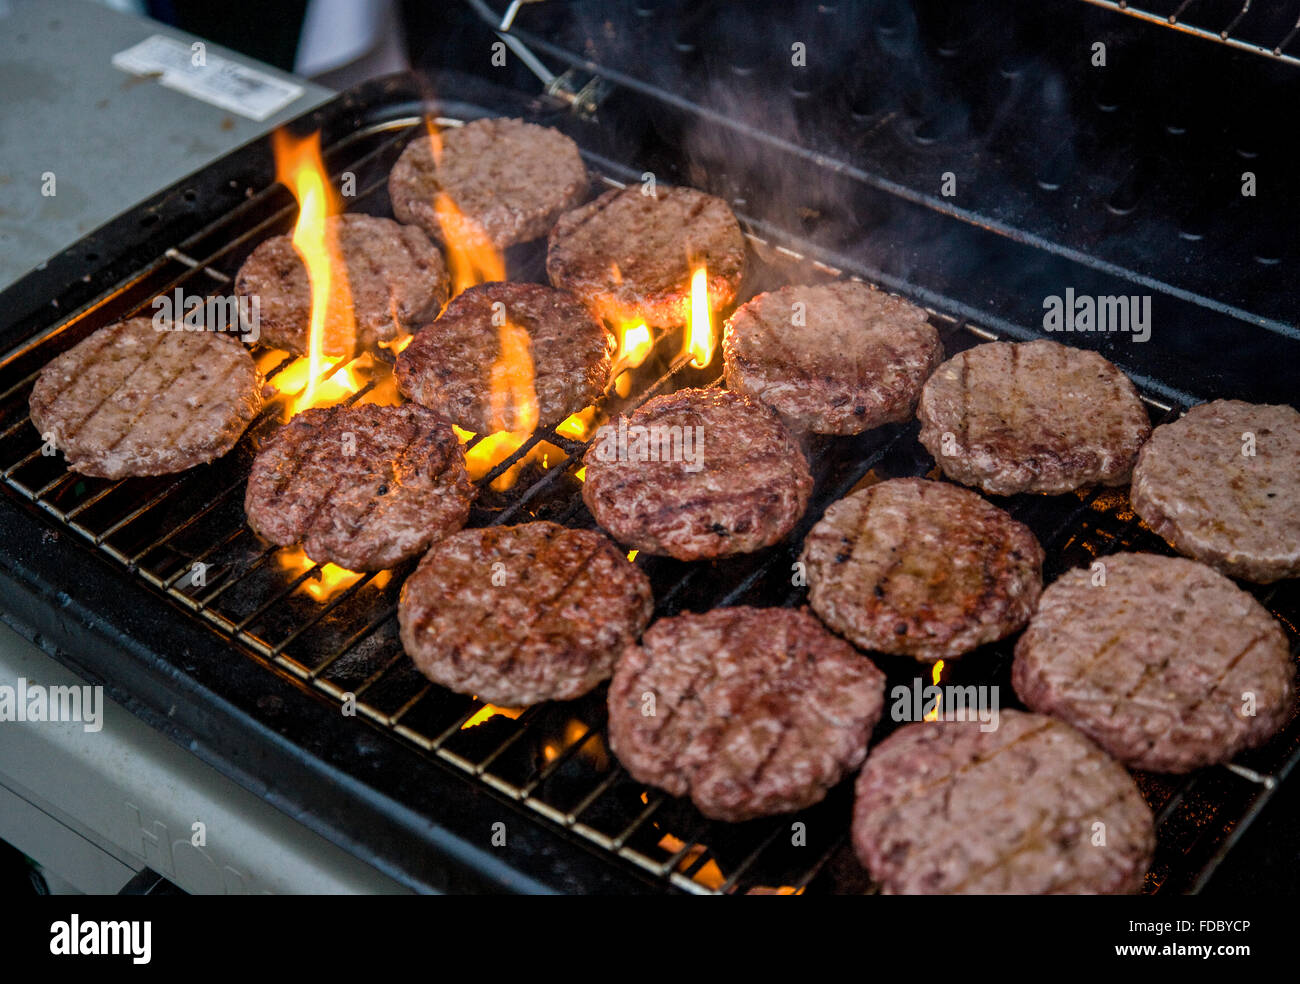 Flame grilled beef burgers on a barbecue BBQ Stock Photo - Alamy